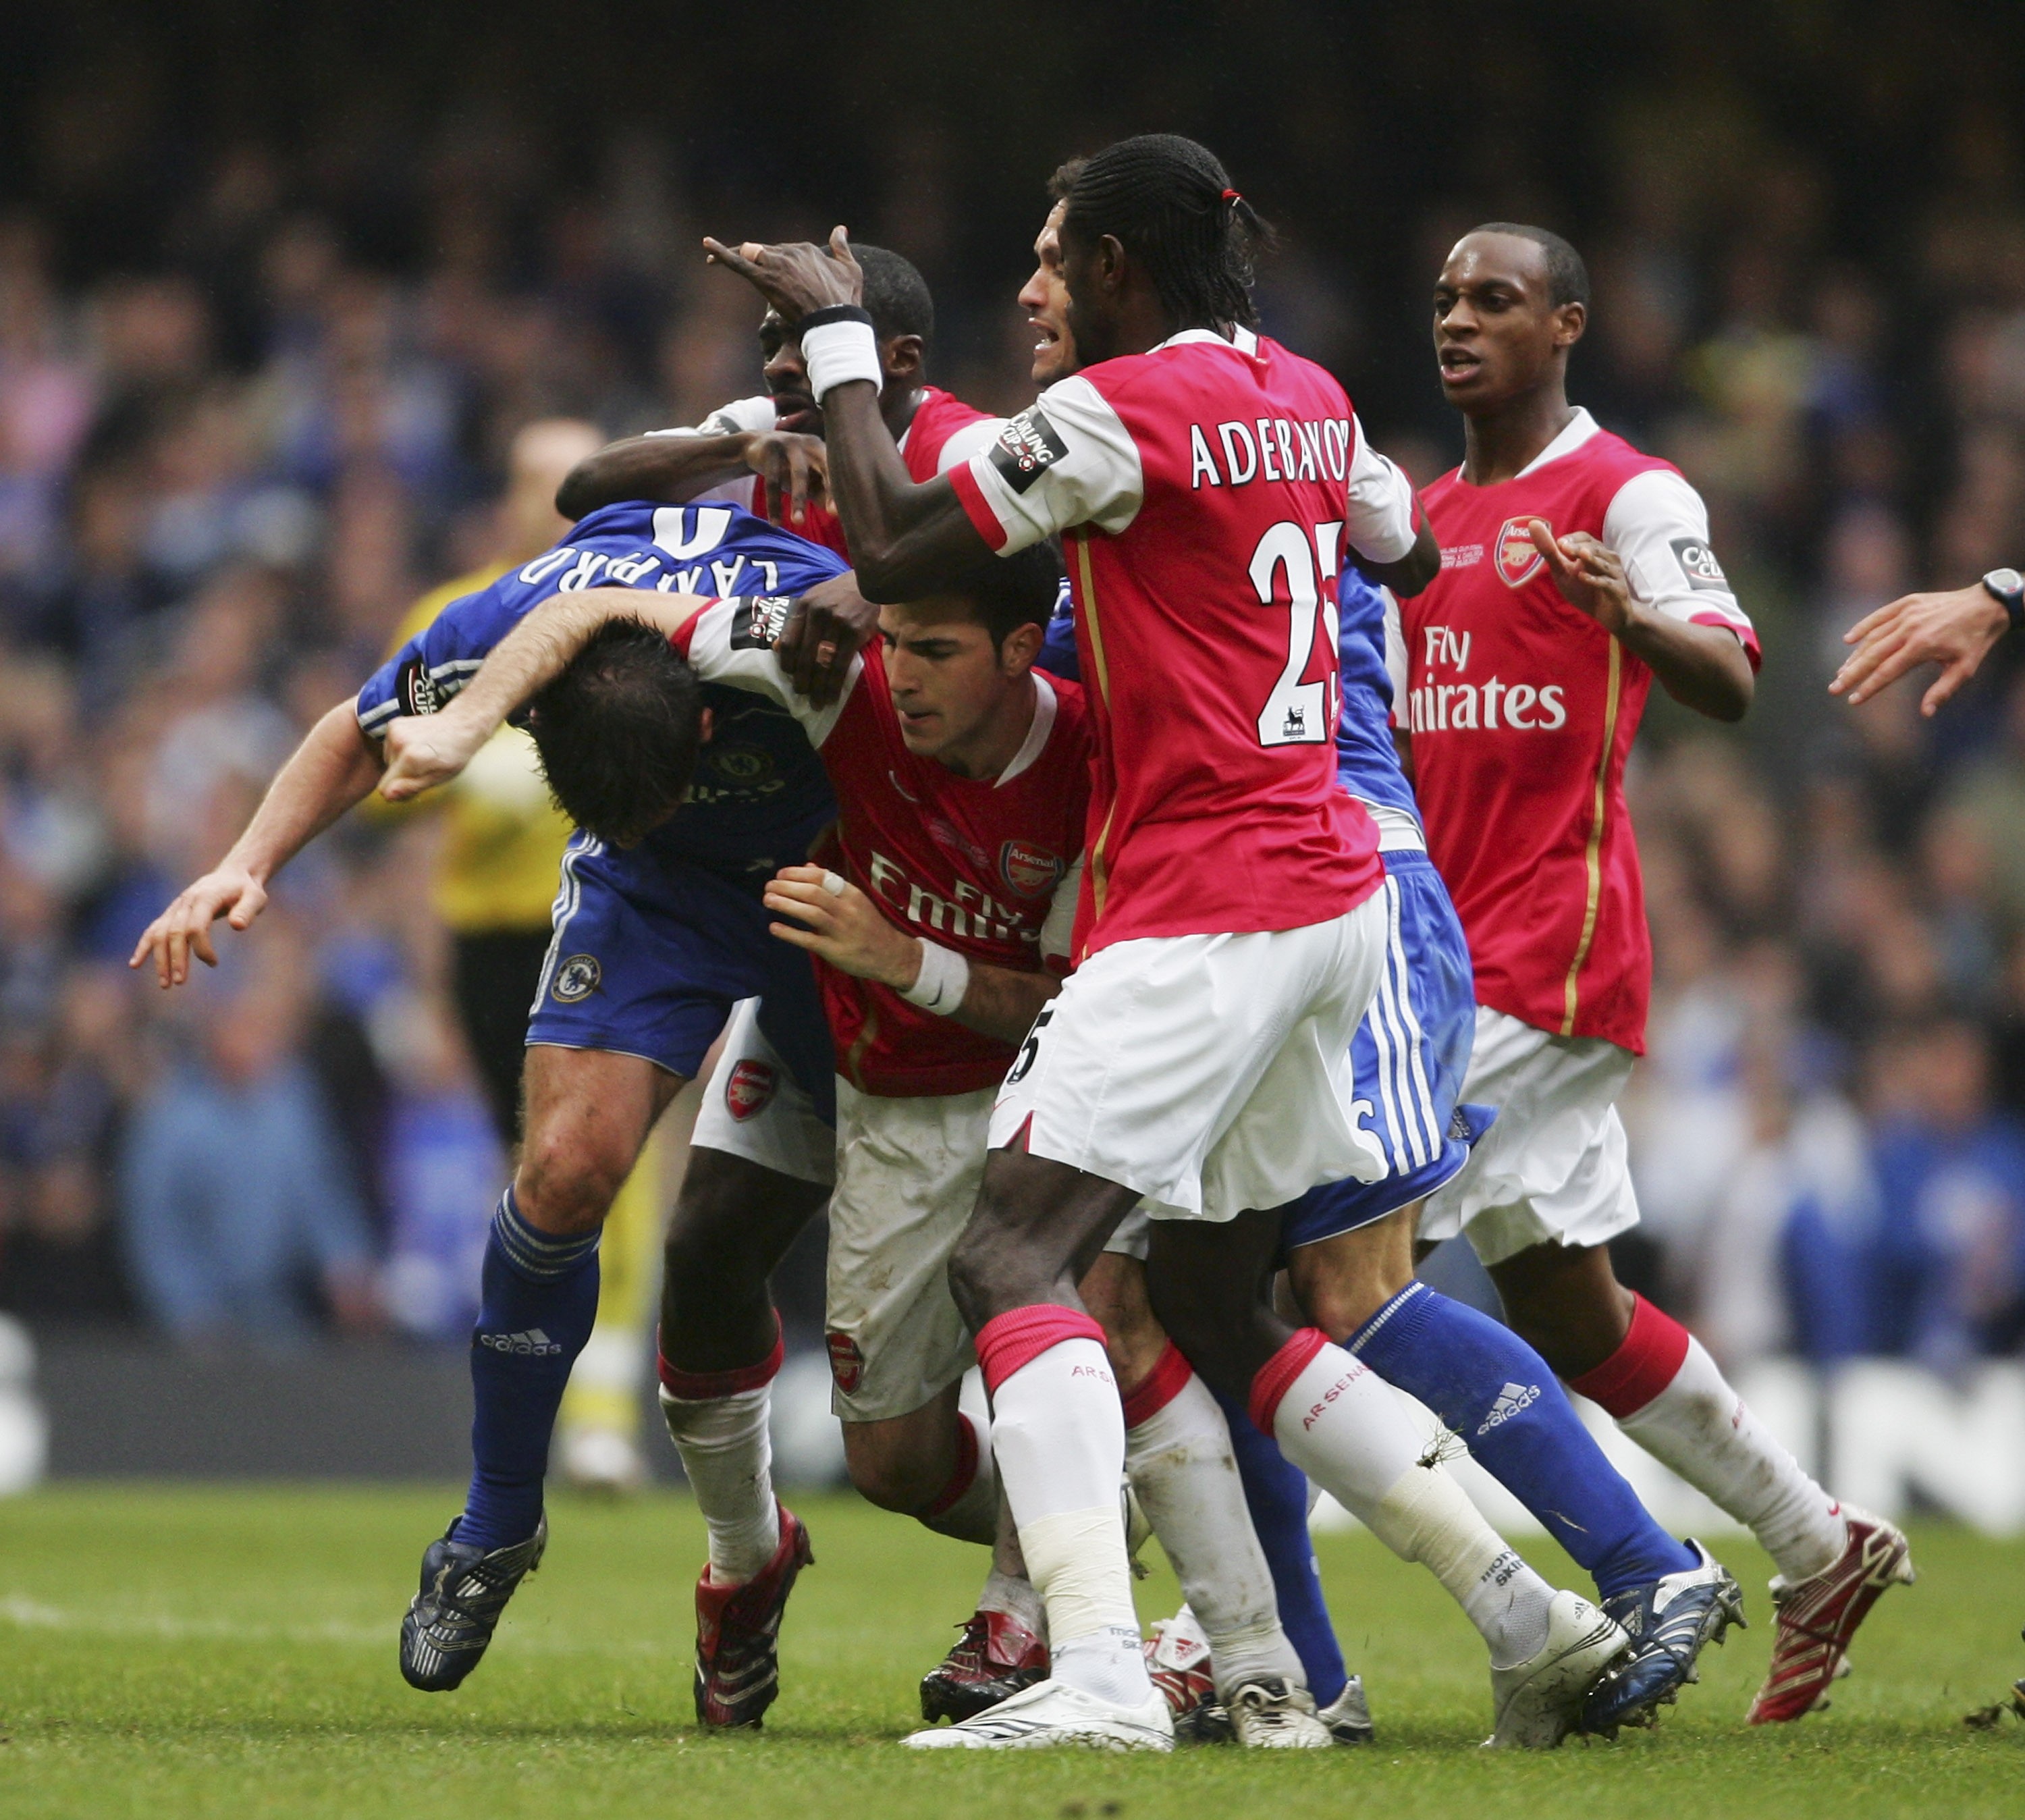 CARDIFF, UNITED KINGDOM - FEBRUARY 25: Frank Lampard of Chelsea fights with Cesc Fabregas of Arsenal during the Carling Cup Final match between Chelsea and Arsenal at the Millennium Stadium on February 25, 2007 in Cardiff, Wales. (Photo by Alex Livesey/Getty Images)